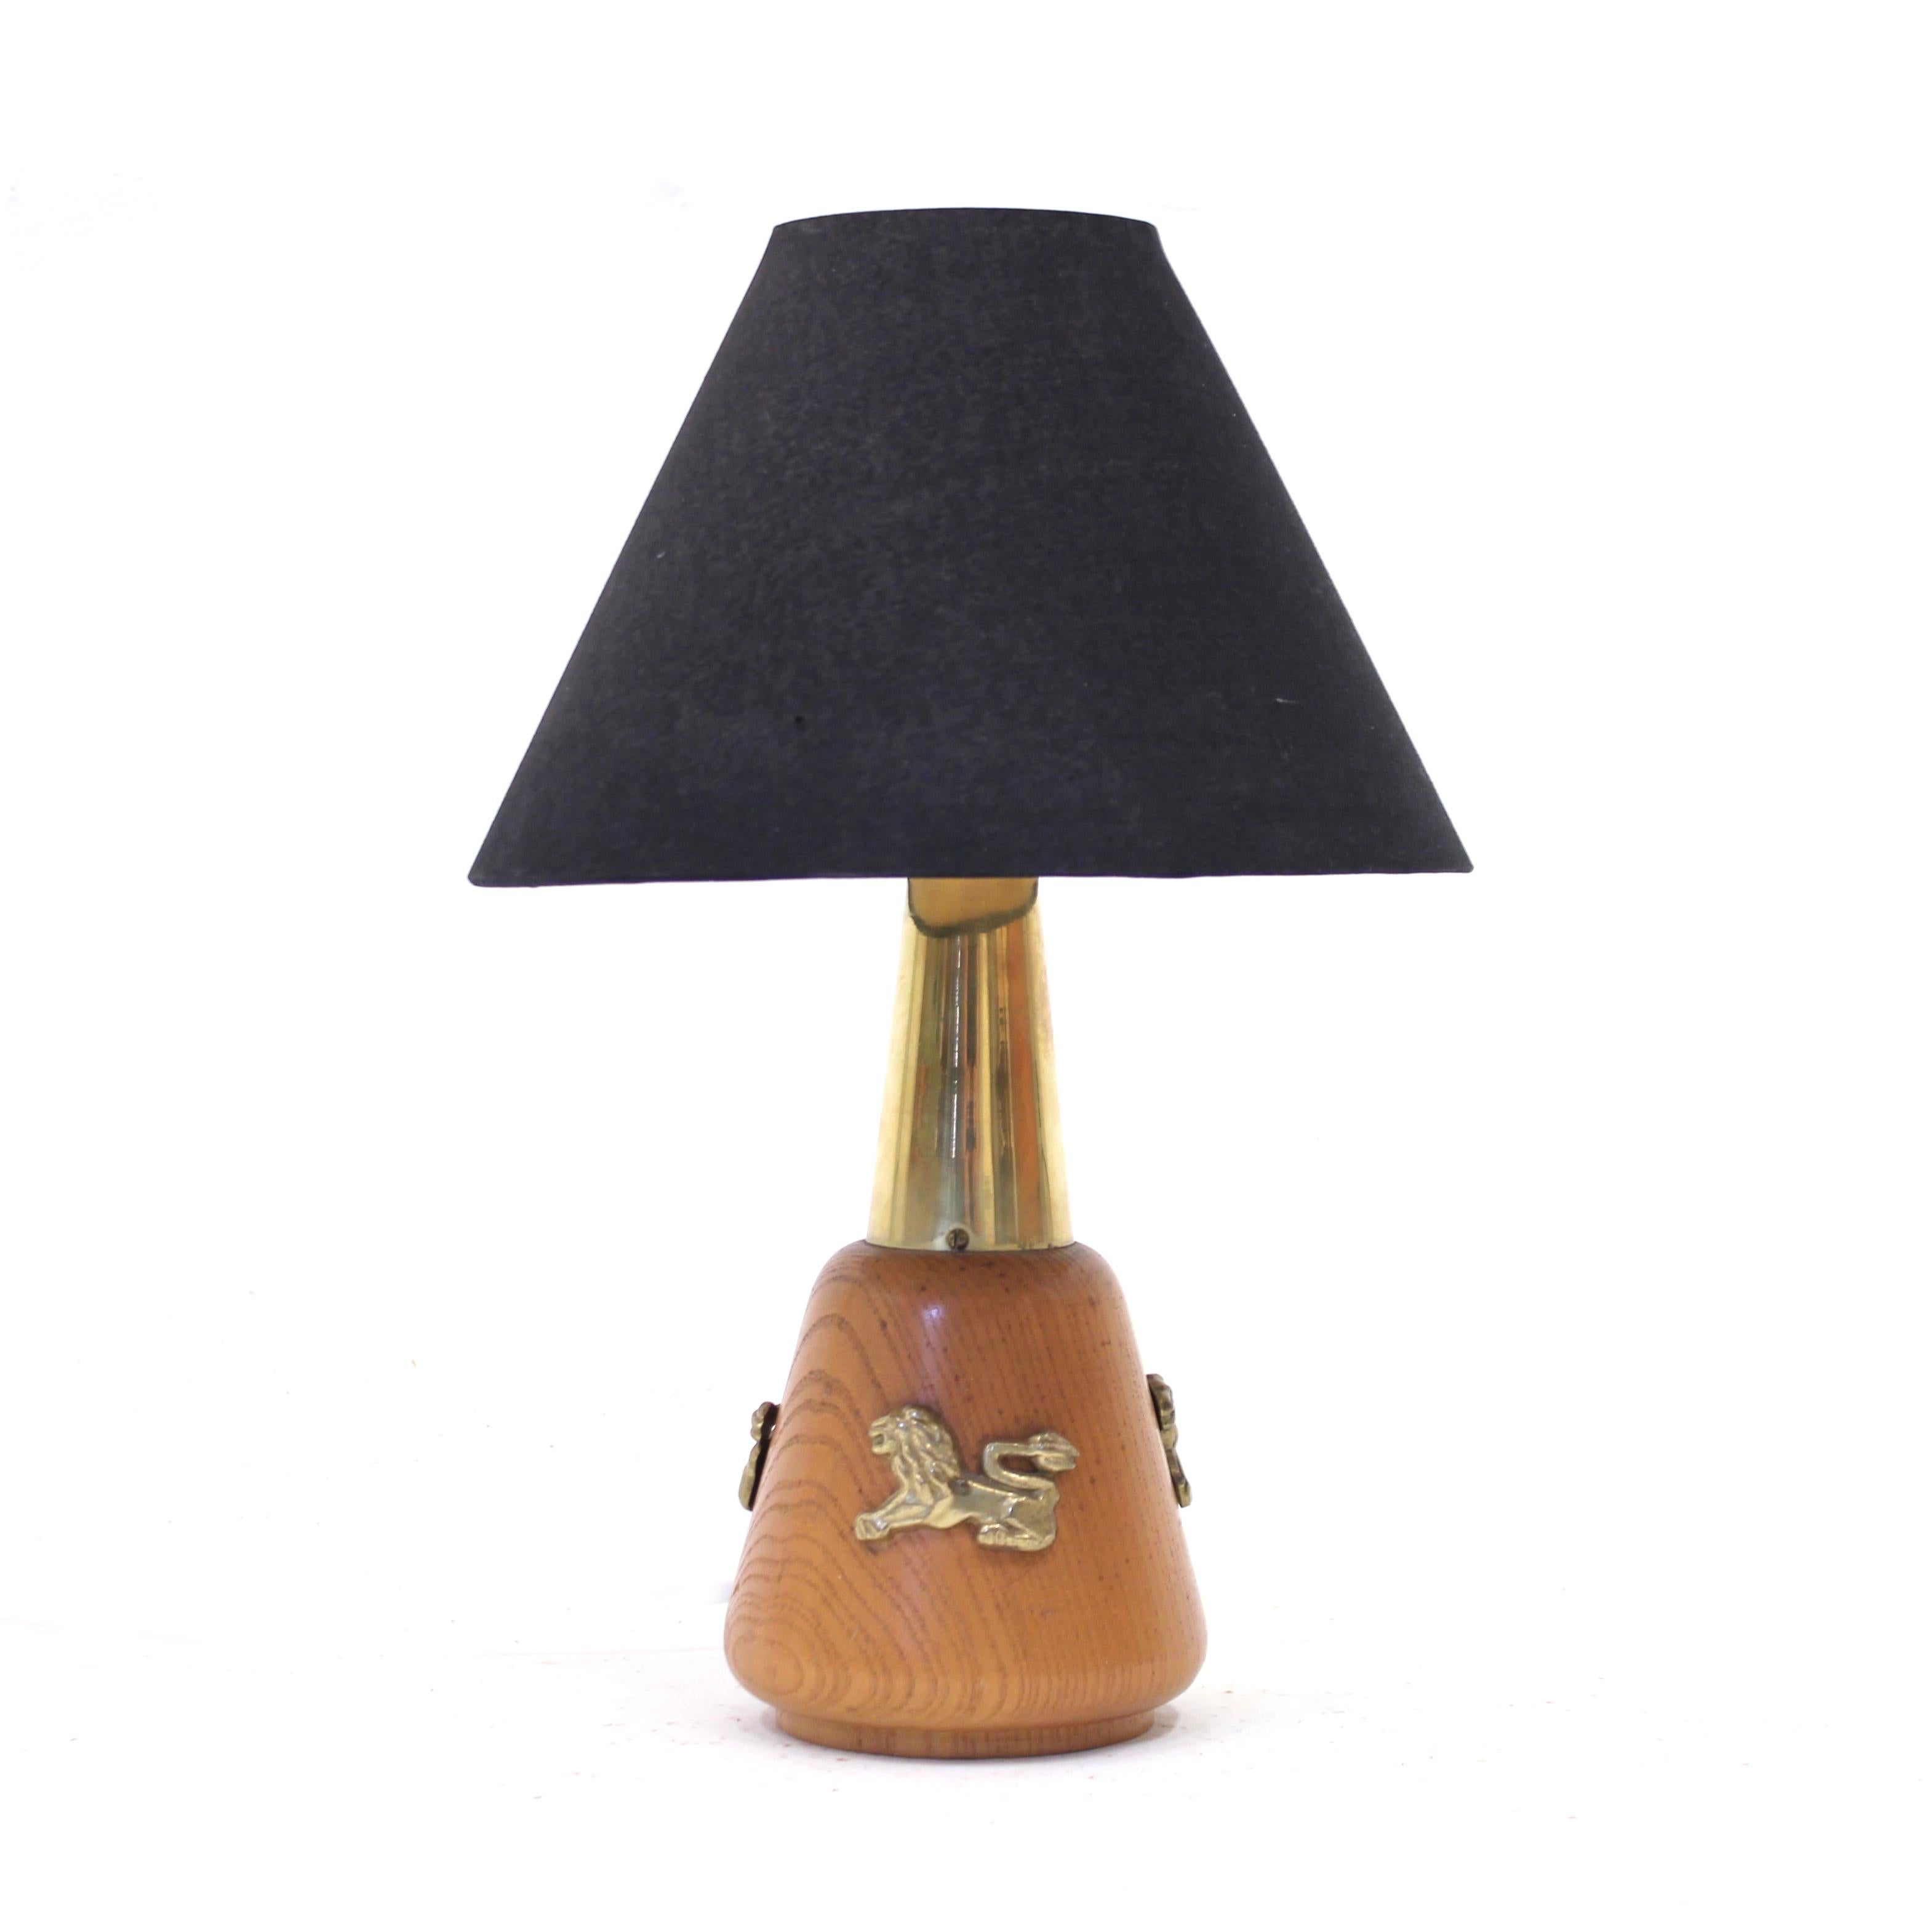 Rare ASEA table lamp in teak and brass with a black shade. Decorated with brass lions on the side of the base. The black shade is vintage but a later addition. Good vintage condition with light ware consistent with age and use.